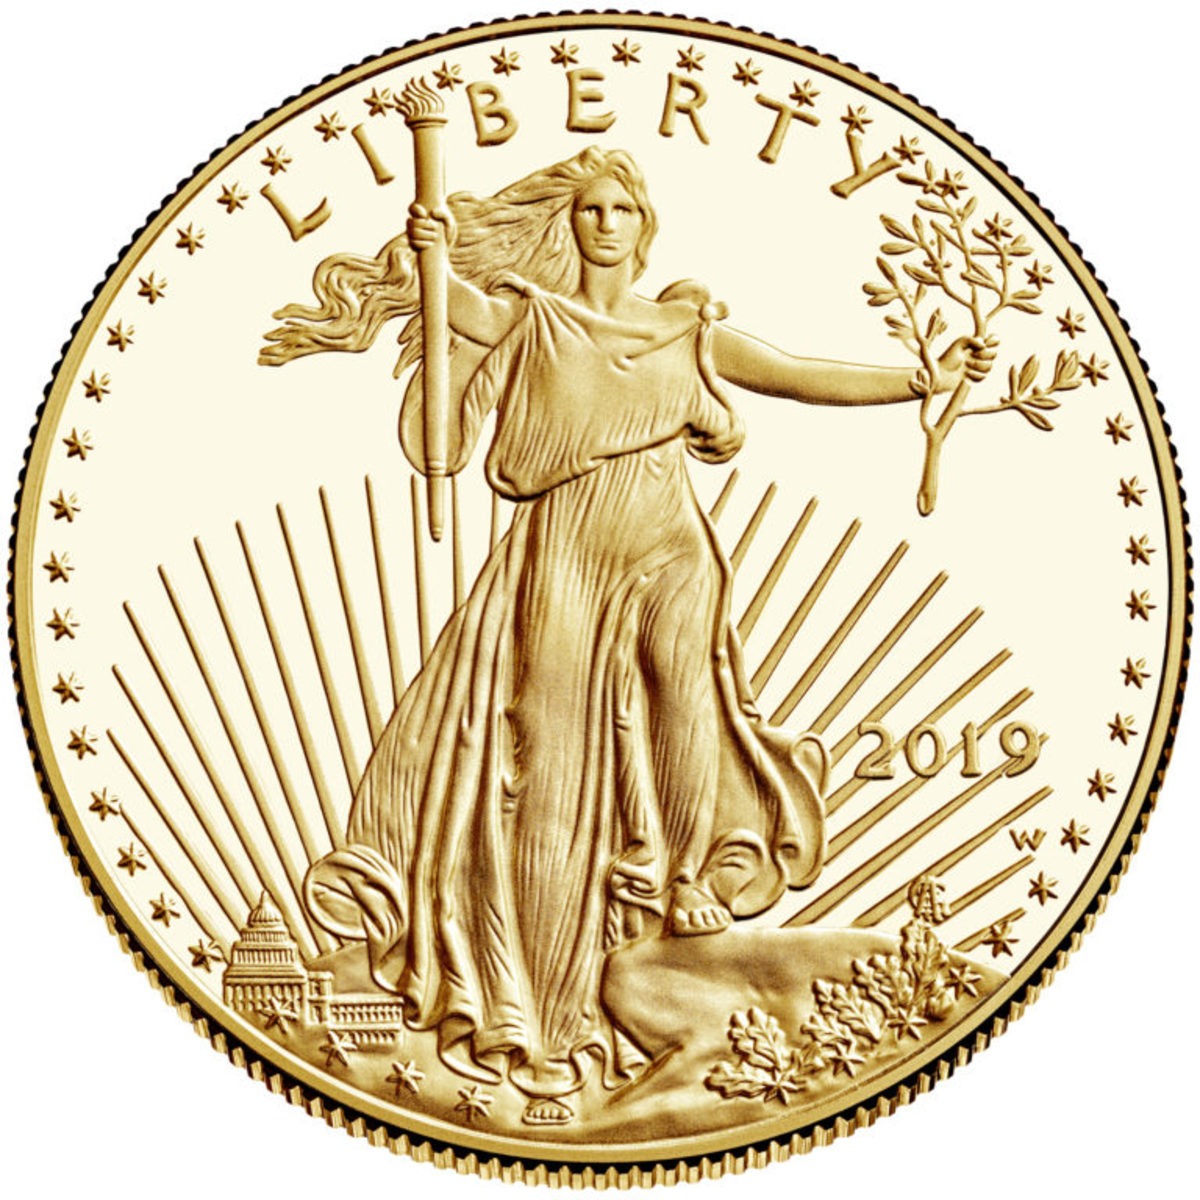 The 2019 bullion gold Eagle contains one gold troy ounce and bears a $50 face value. (Image courtesy of the United States Mint)